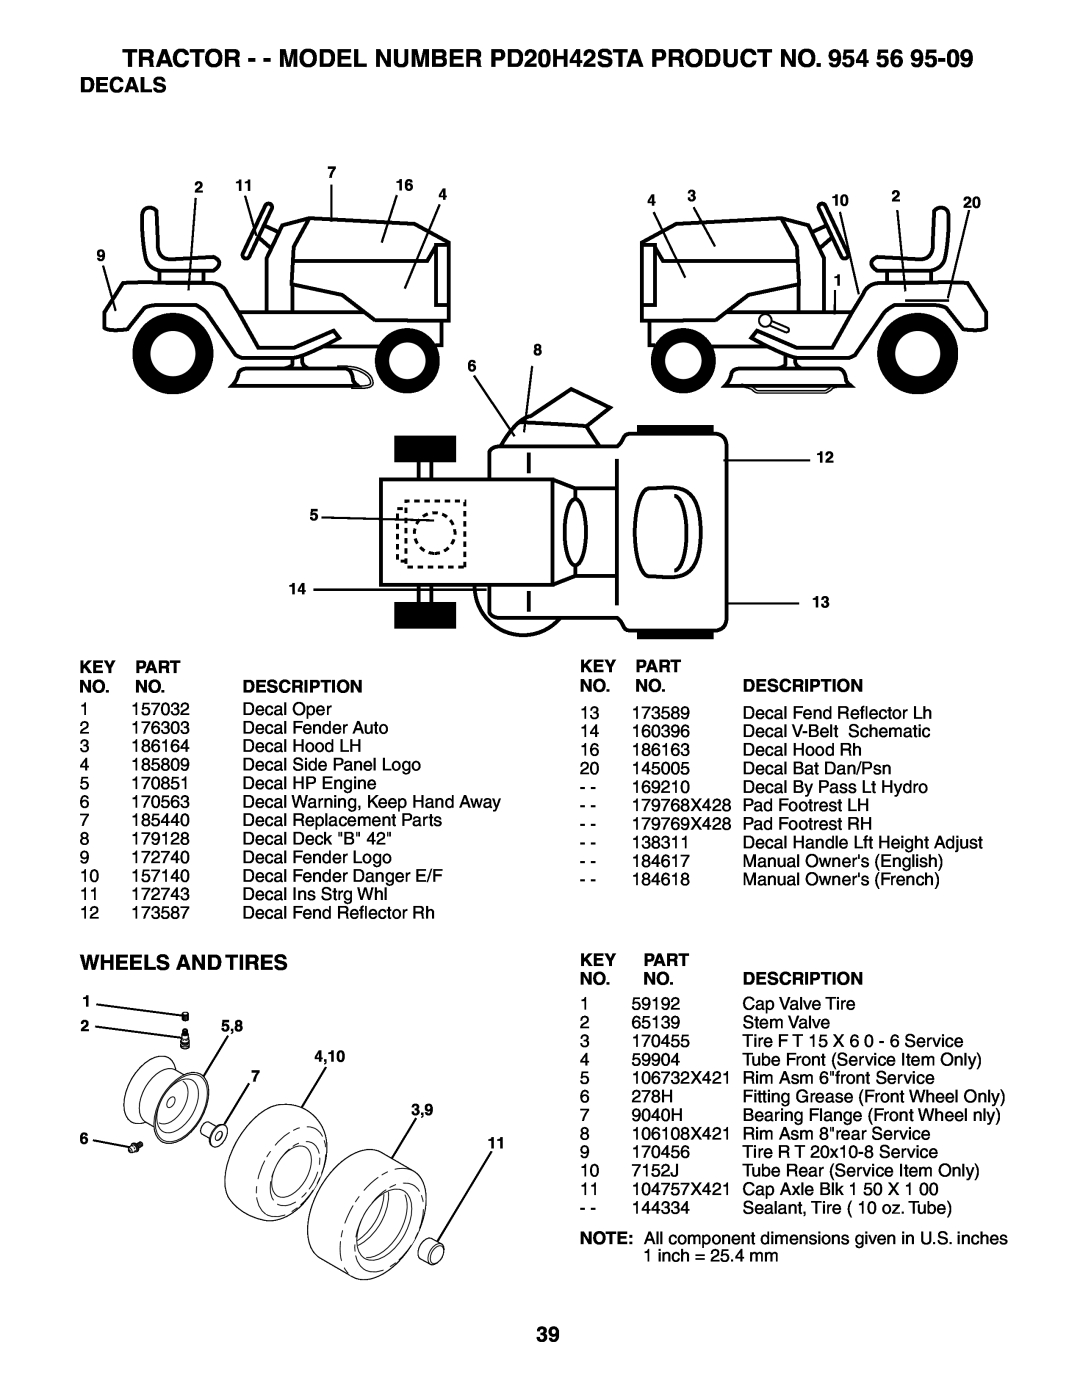 Poulan owner manual Decals, Wheels And Tires, TRACTOR - - MODEL NUMBER PD20H42STA PRODUCT NO. 954 56, 25,8 4,10 